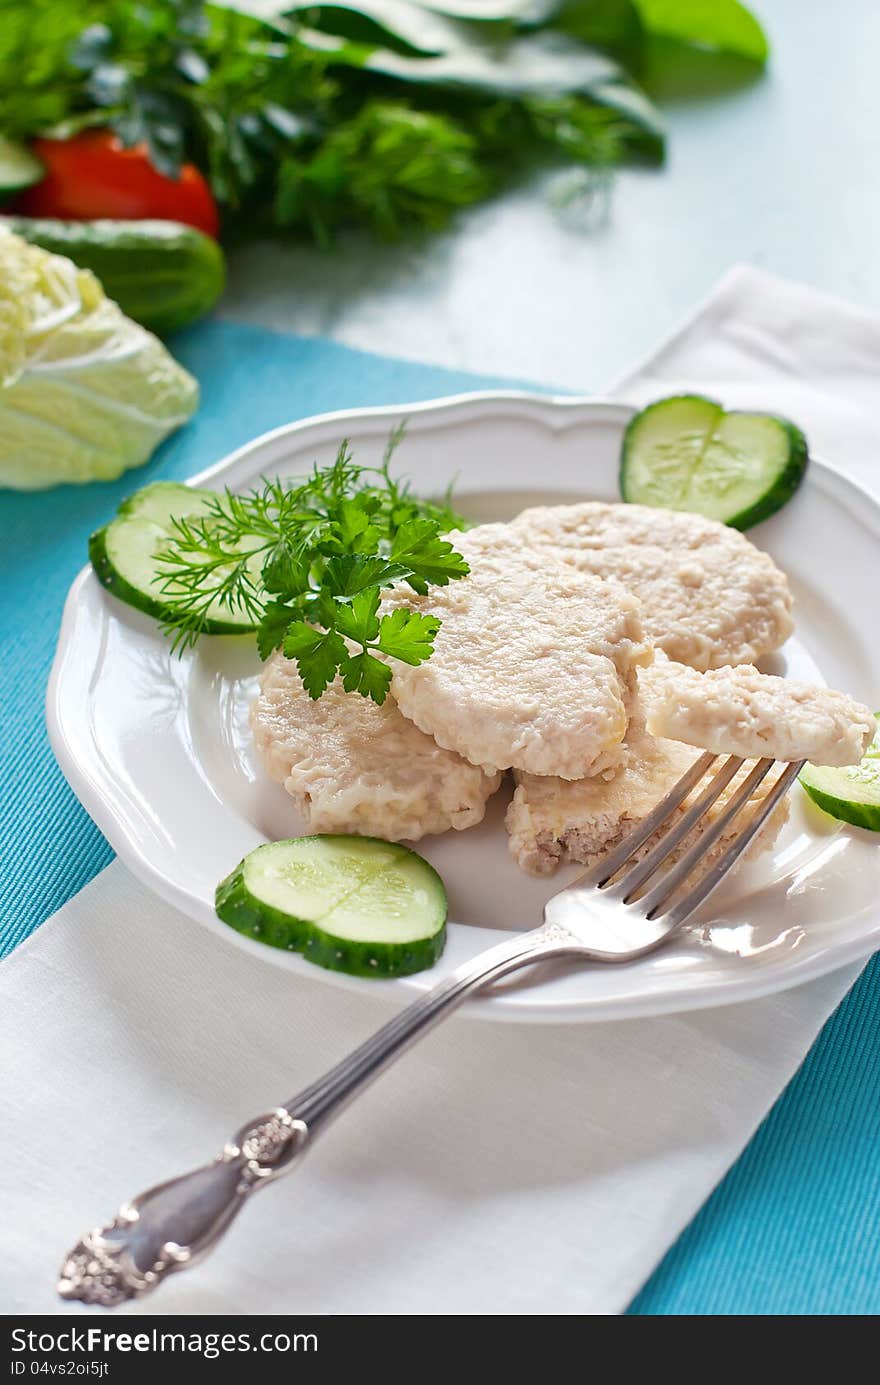 Dietary Cutlets on Pair on a White Plate with Pieces of Cucumber. Dietary Cutlets on Pair on a White Plate with Pieces of Cucumber